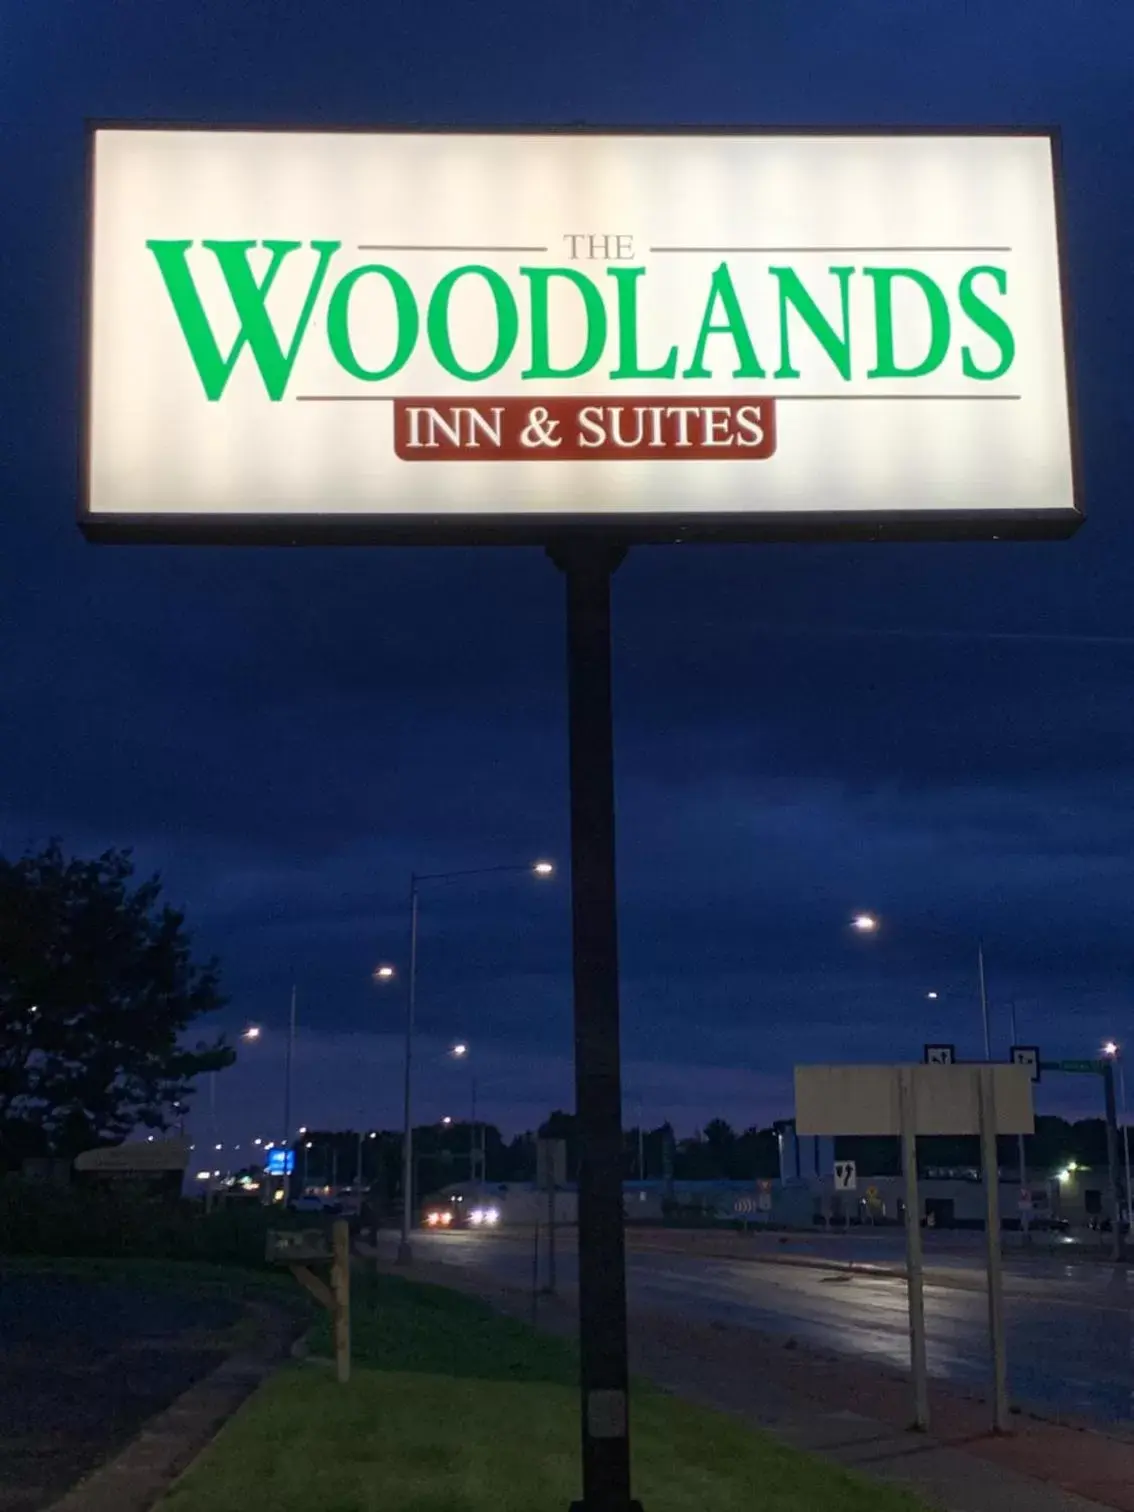 Property logo or sign in Woodland Inn & Suites